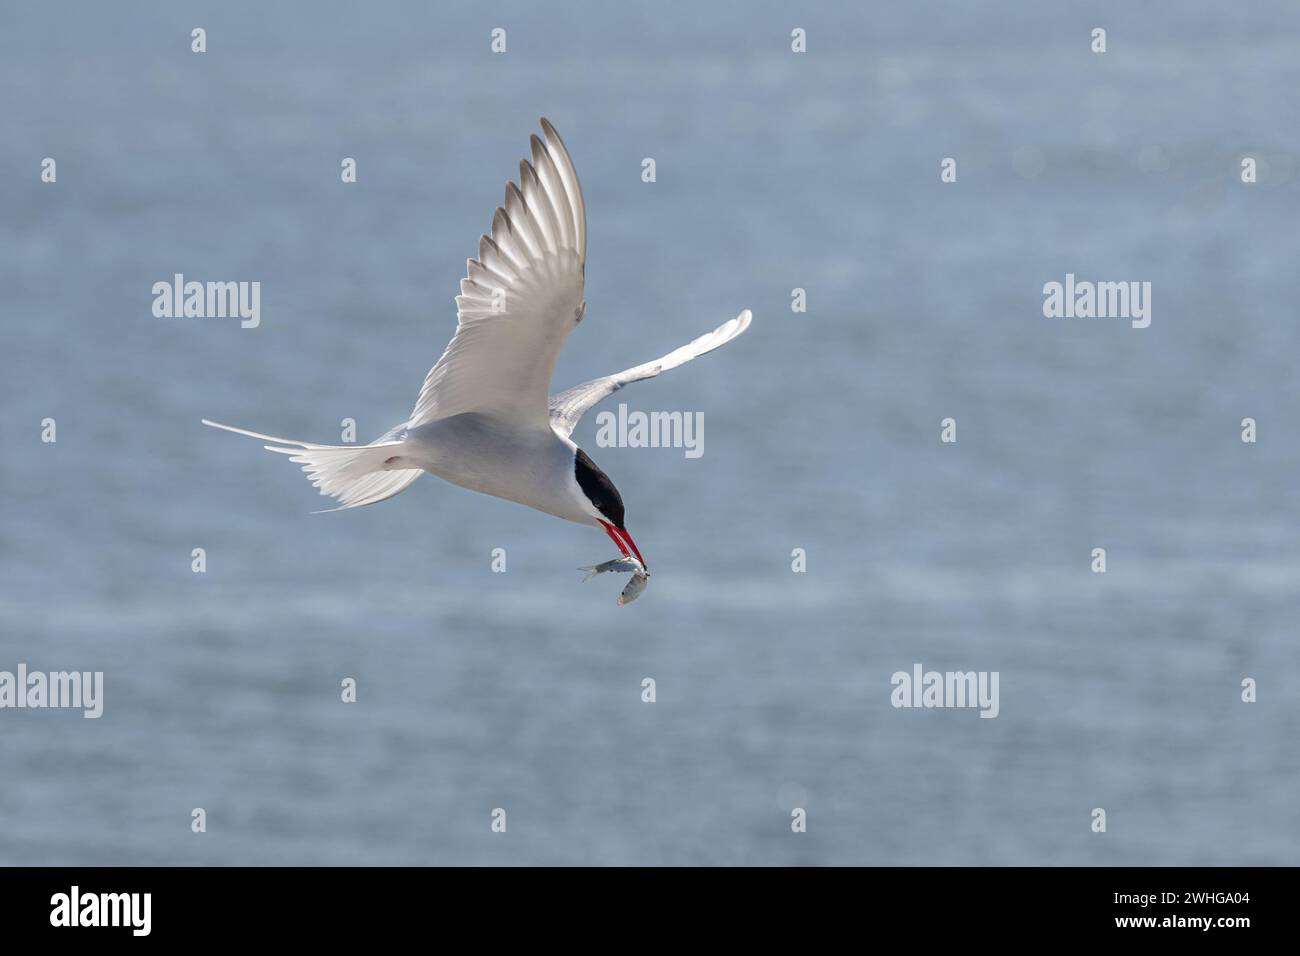 Flying arctic tern (Sterna paradisaea) with a fish in its beak over the blue sea, the elegant migration bird has the longest rou Stock Photo